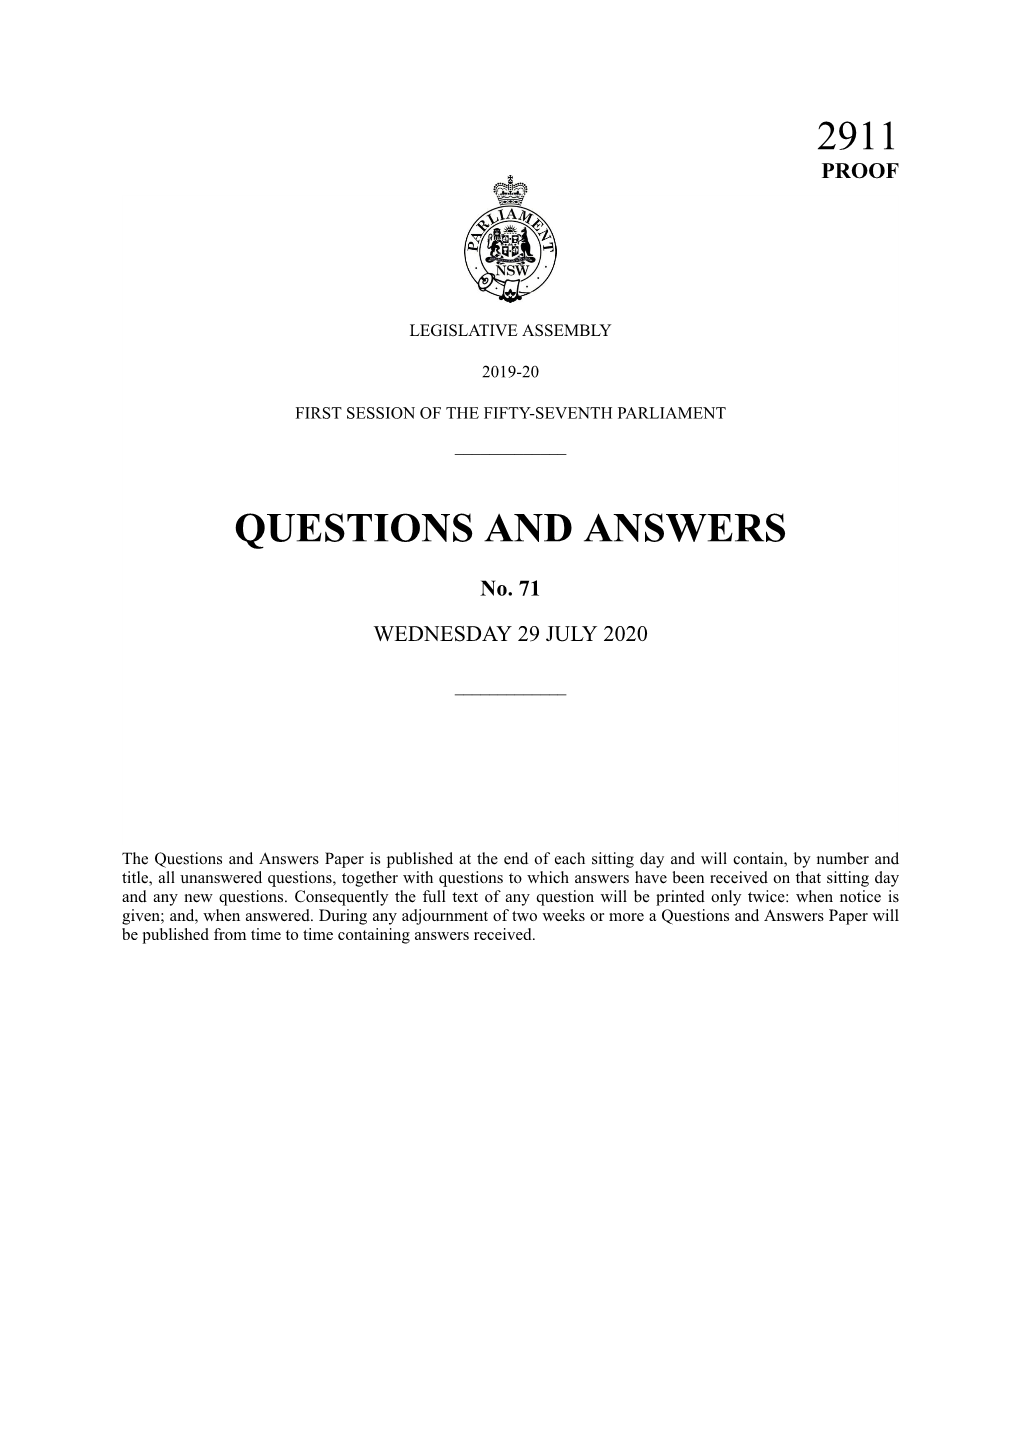 Questions and Answers 2911